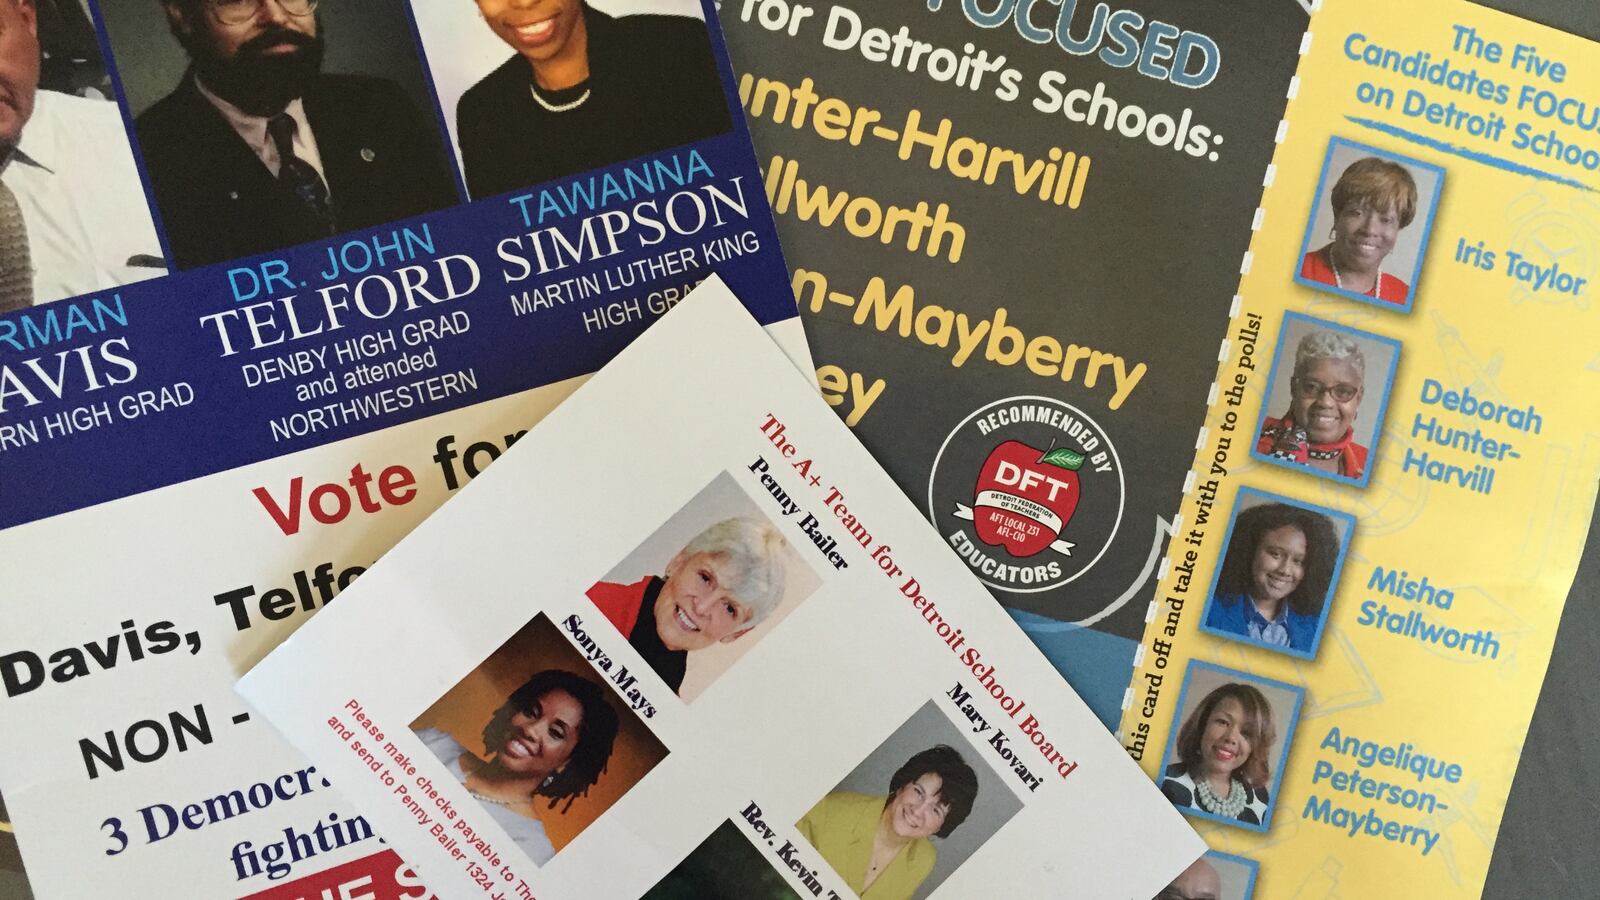 There are 63 candidates angling for seven seats on the new Detroit school board